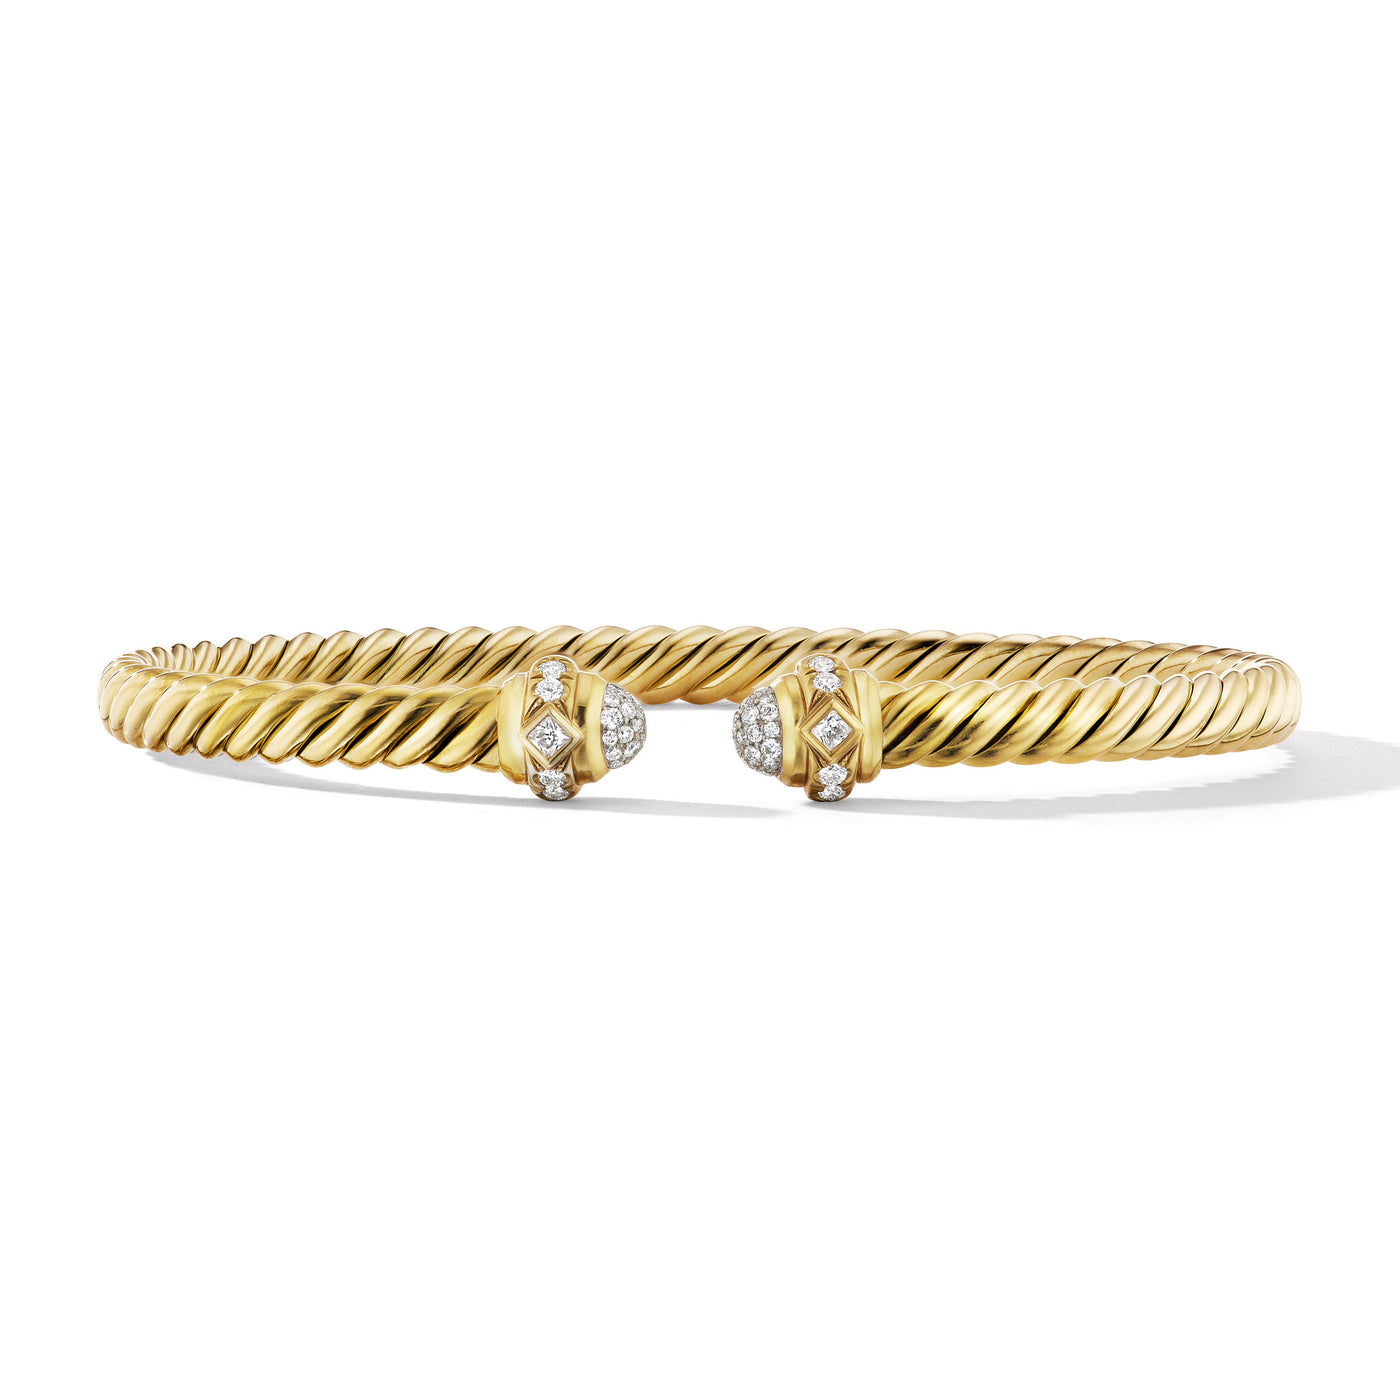 Renaissance® Oval Cablespira Bracelet in 18K Yellow Gold with Diamonds\, 4.5mm